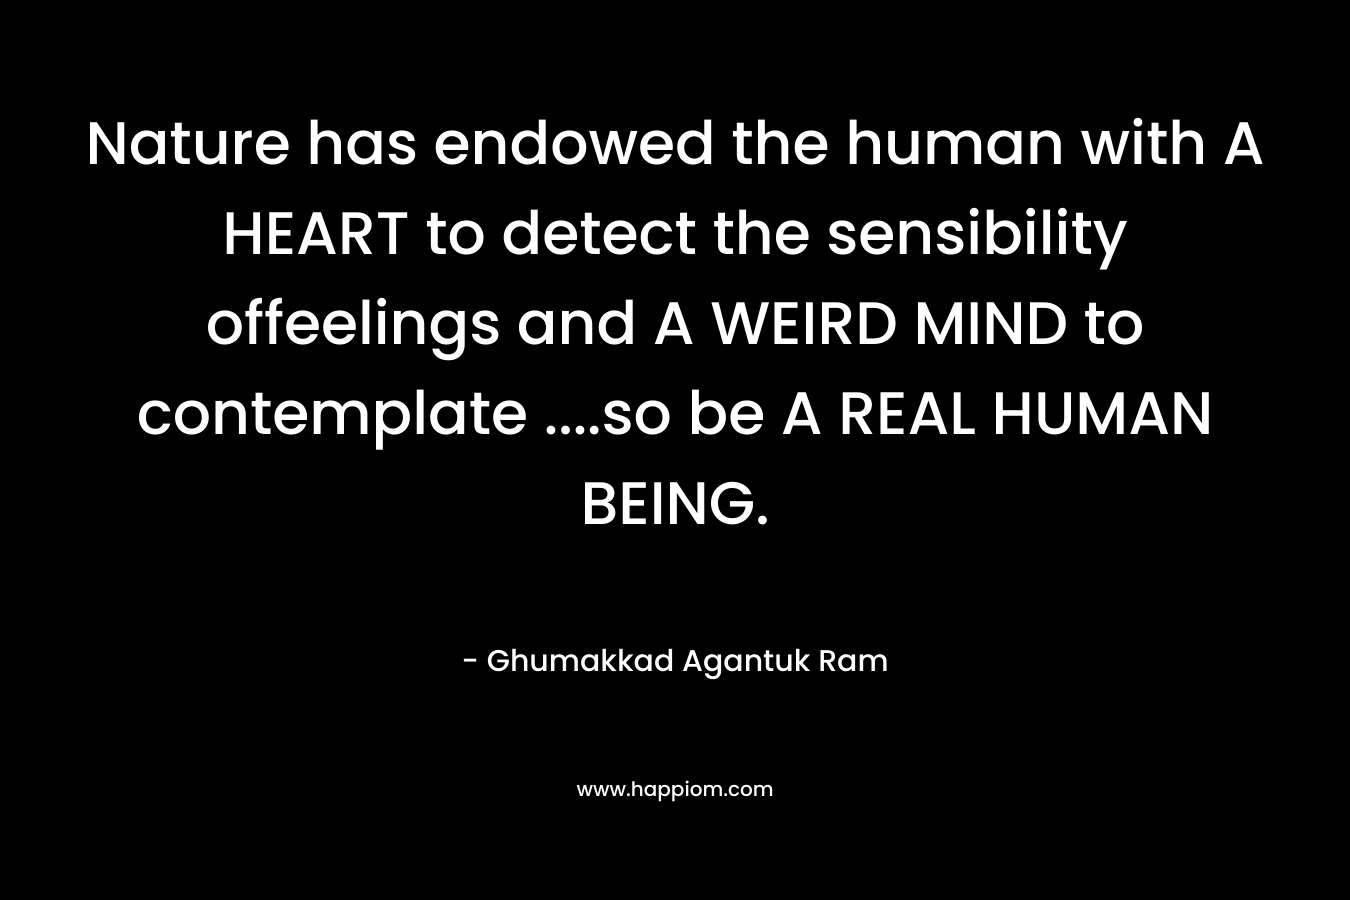 Nature has endowed the human with A HEART to detect the sensibility offeelings and A WEIRD MIND to contemplate ….so be A REAL HUMAN BEING. – Ghumakkad Agantuk Ram